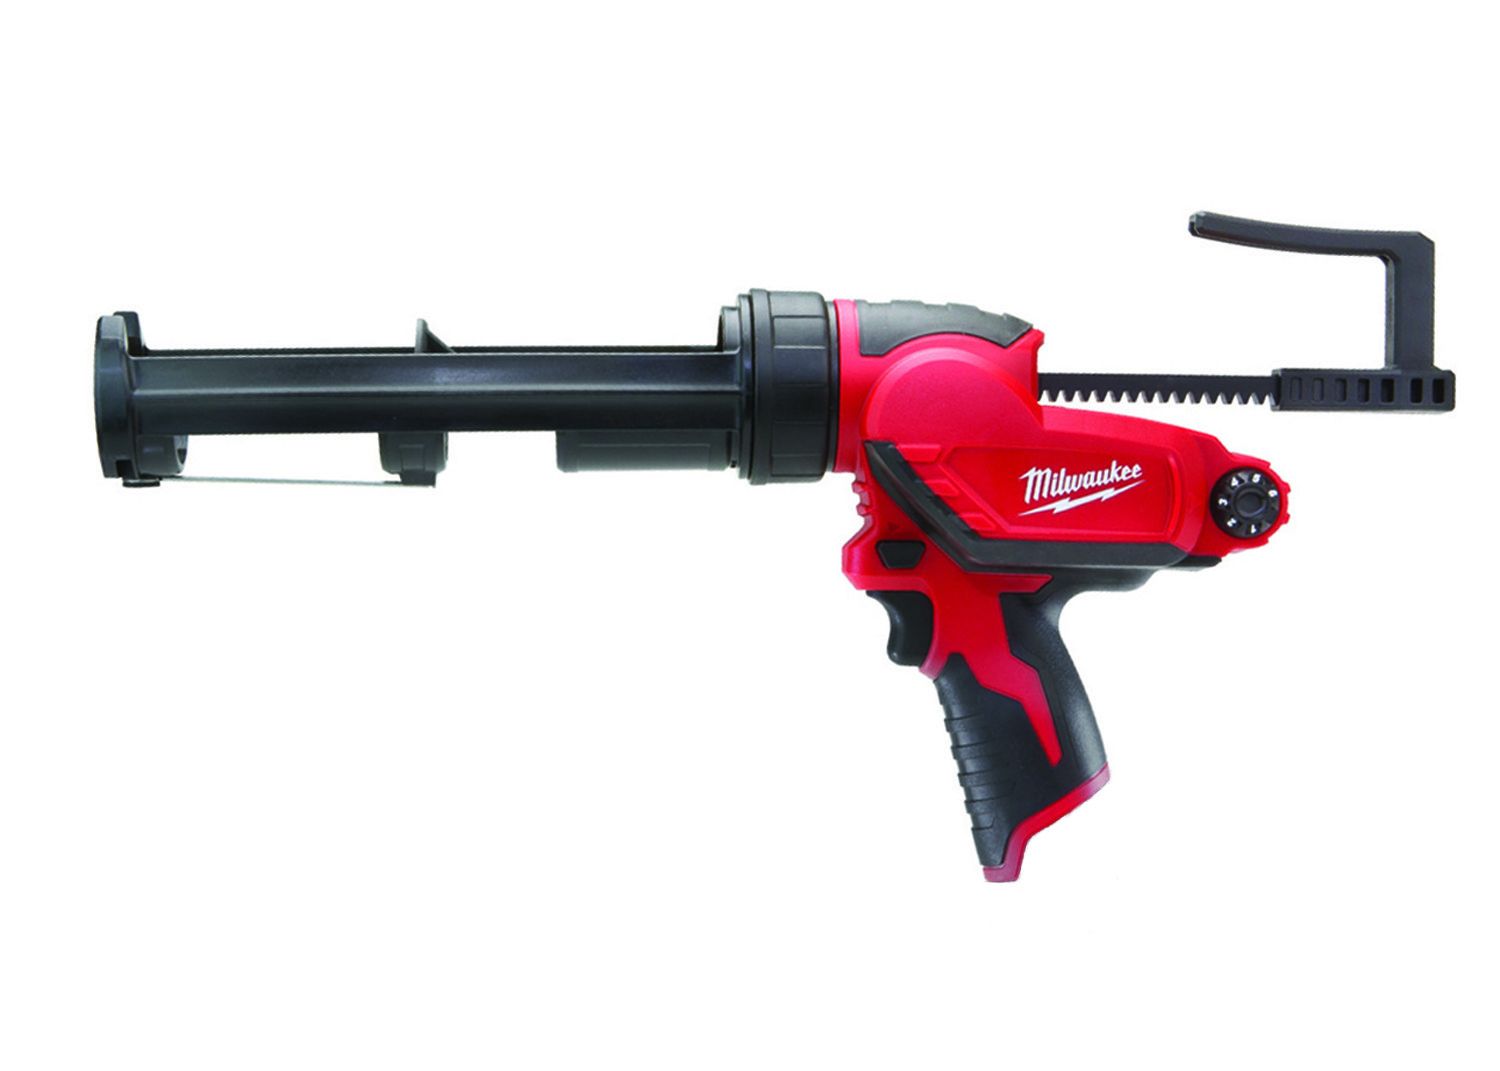 Speciality Power Tools